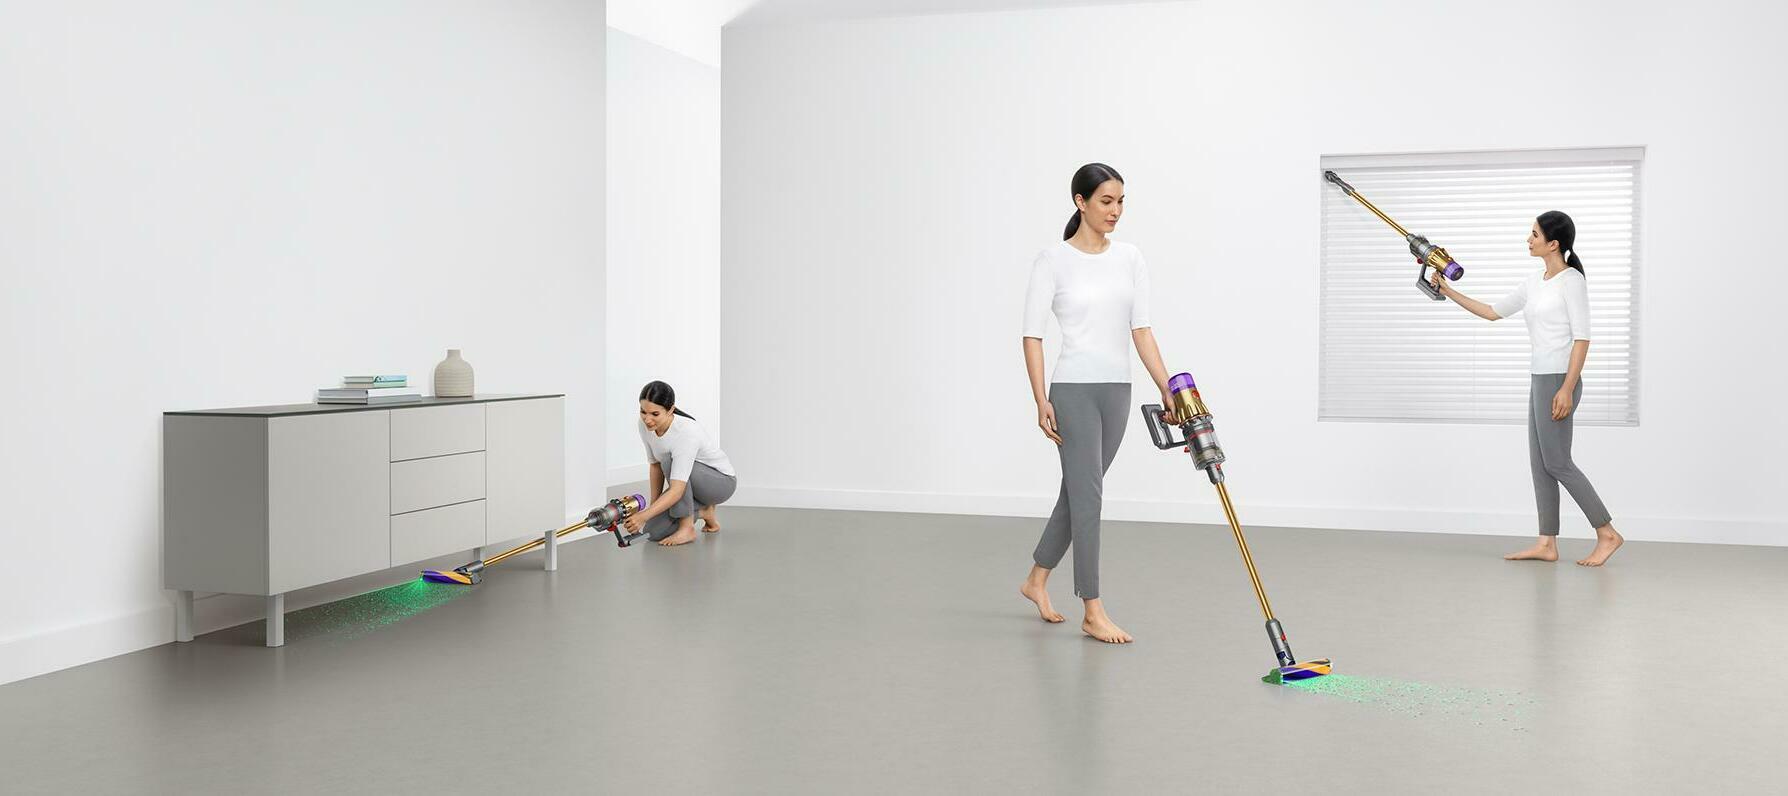 Vacuum cleaner: Our Summer cleaning checklist